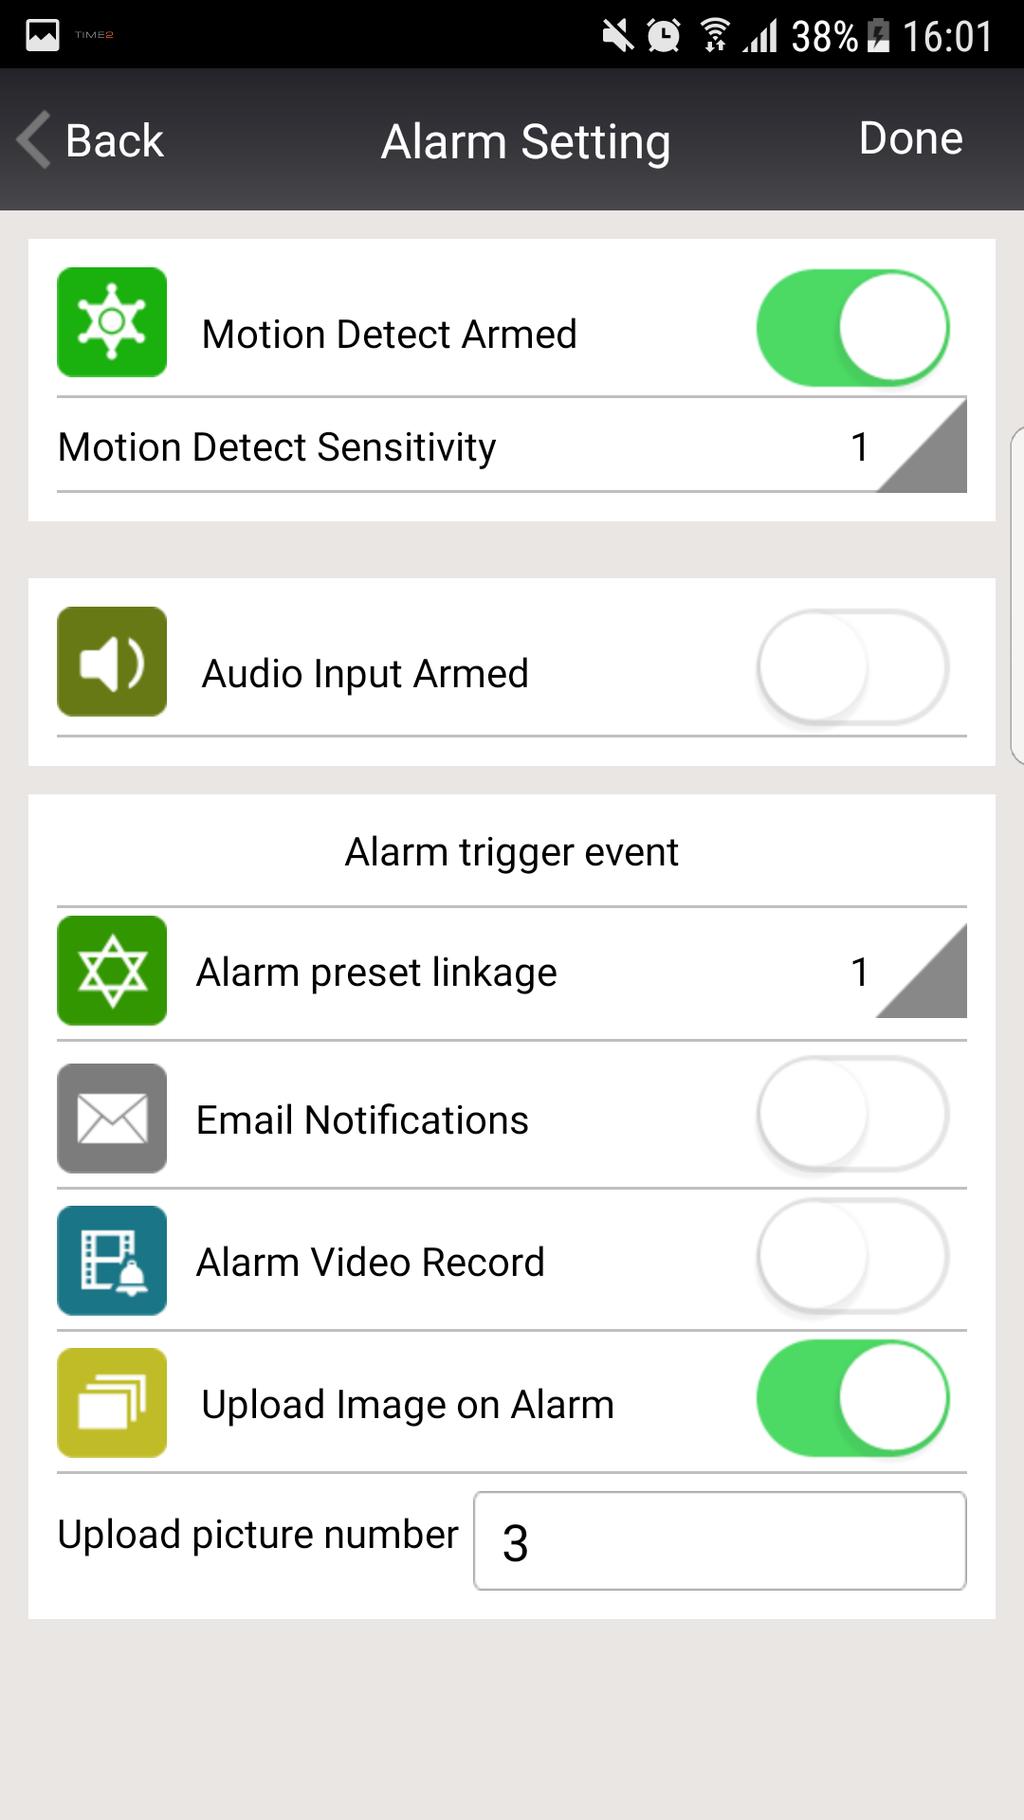 Alarm Setting Using this setting you can set the camera to